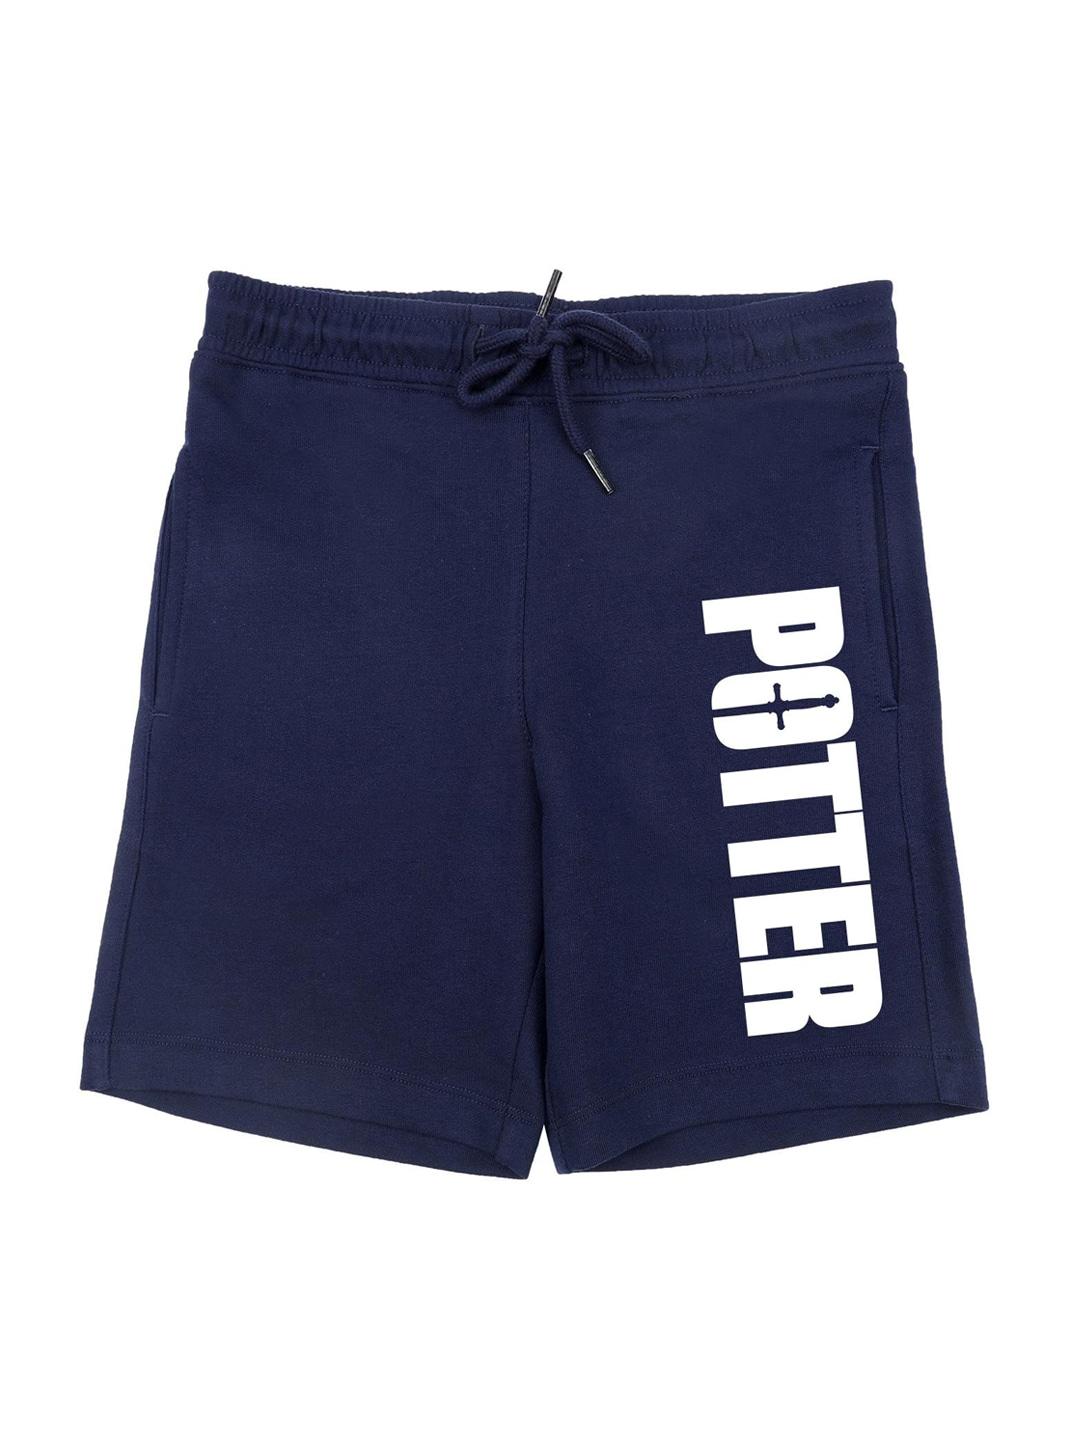 harry-potter-by-wear-your-mind-boys-navy-blue-typography-printed-harry-potter-shorts